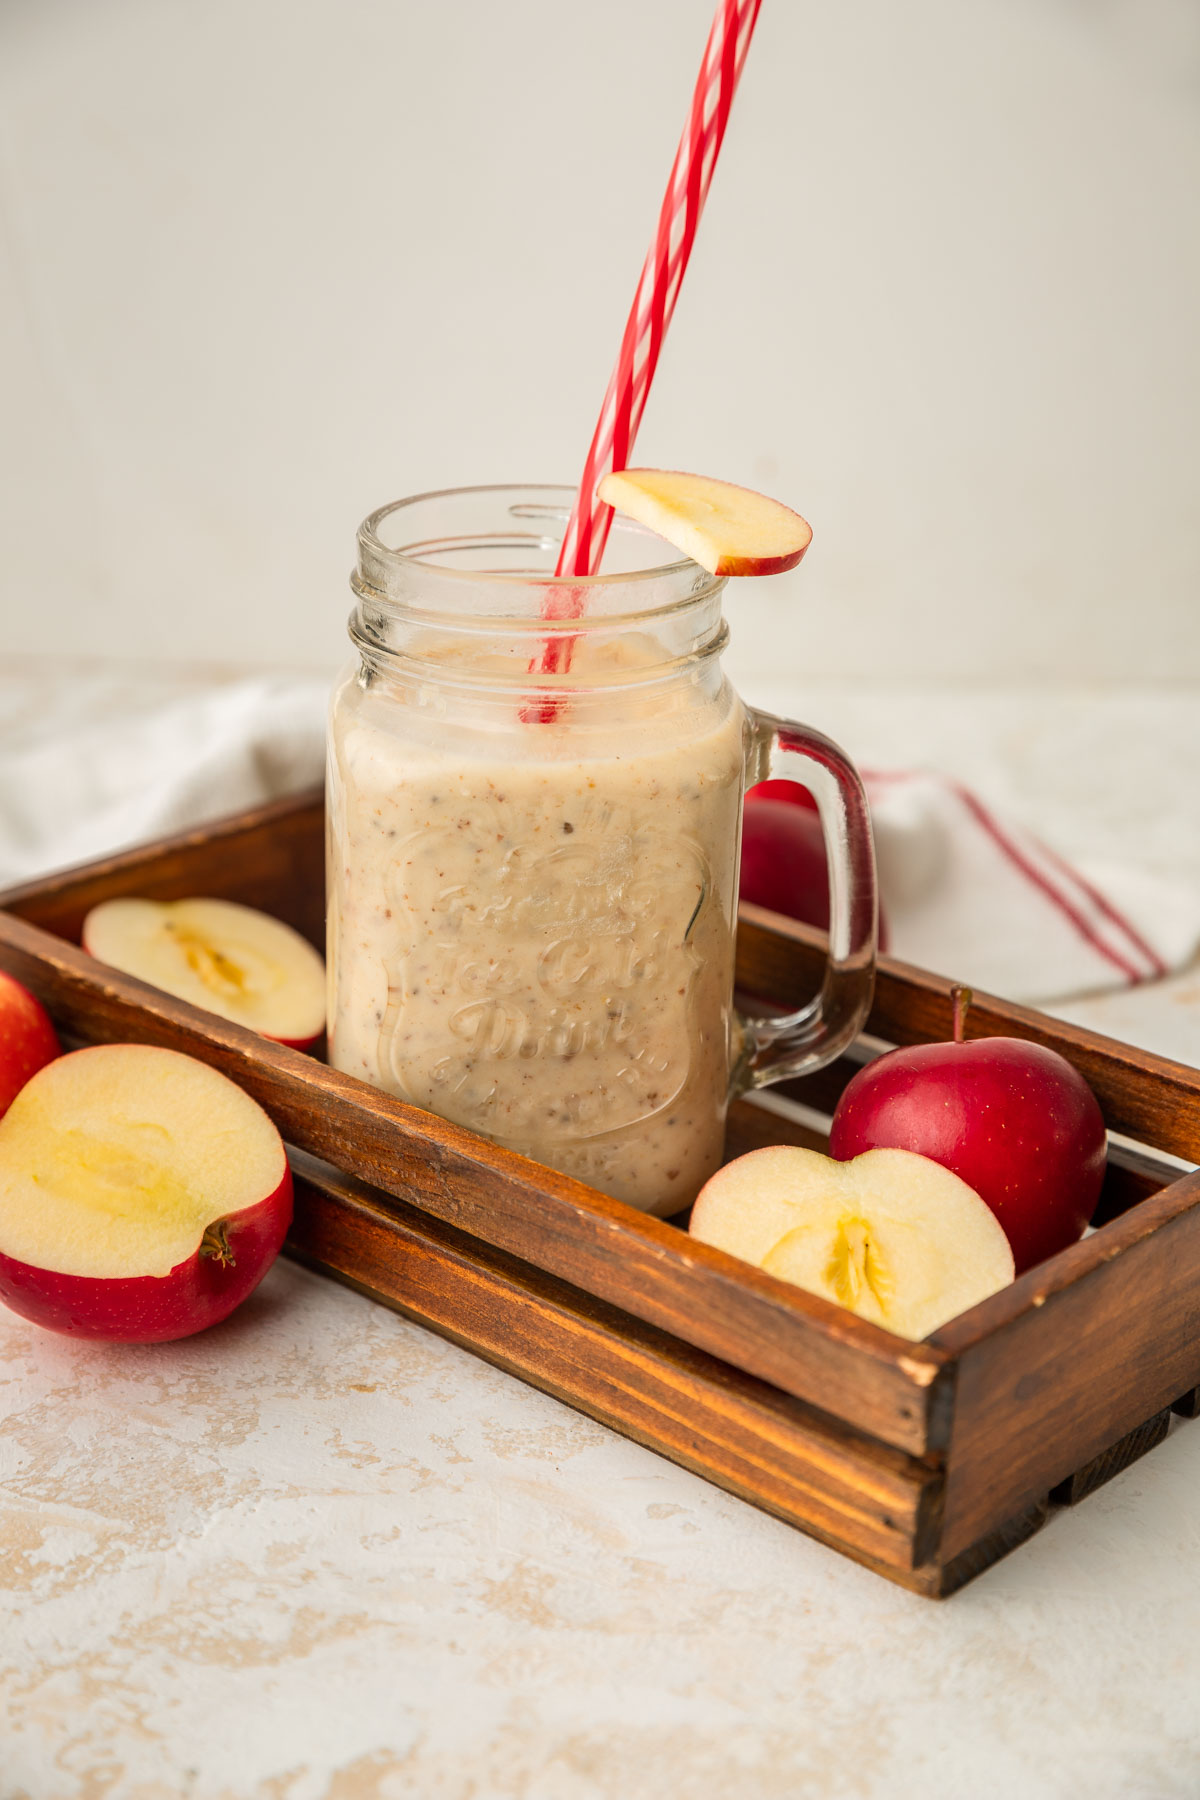 Apple date smoothie on wooden tray with cut apples around it.